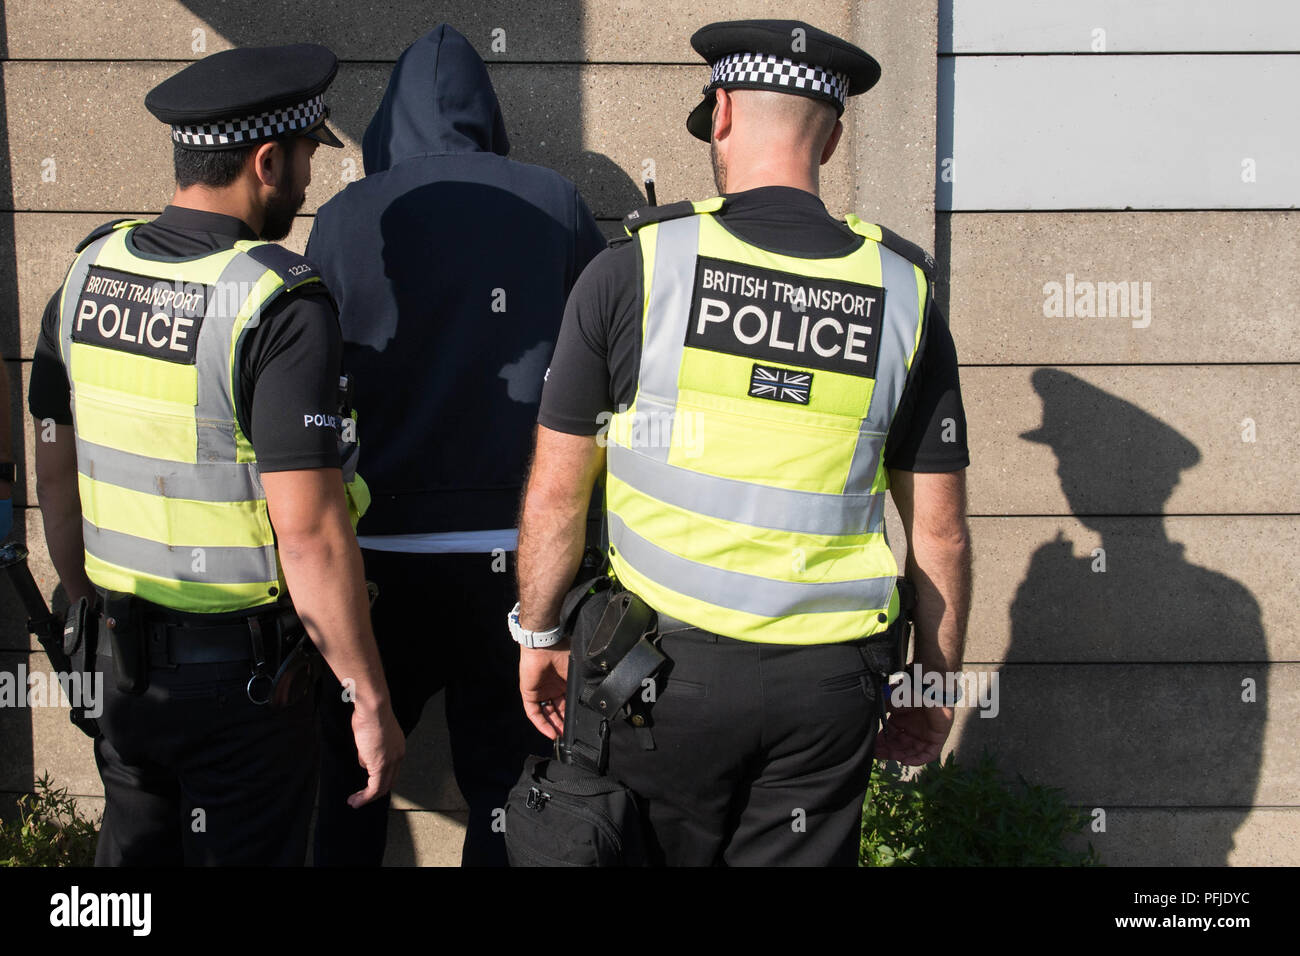 A motorist is pulled over by officers from the Violent Crime Task Force working in partnership with units across the Metropoltan Police carrying out an intelligence led stop and search operation targeting violent crime in London using the road network. Stock Photo